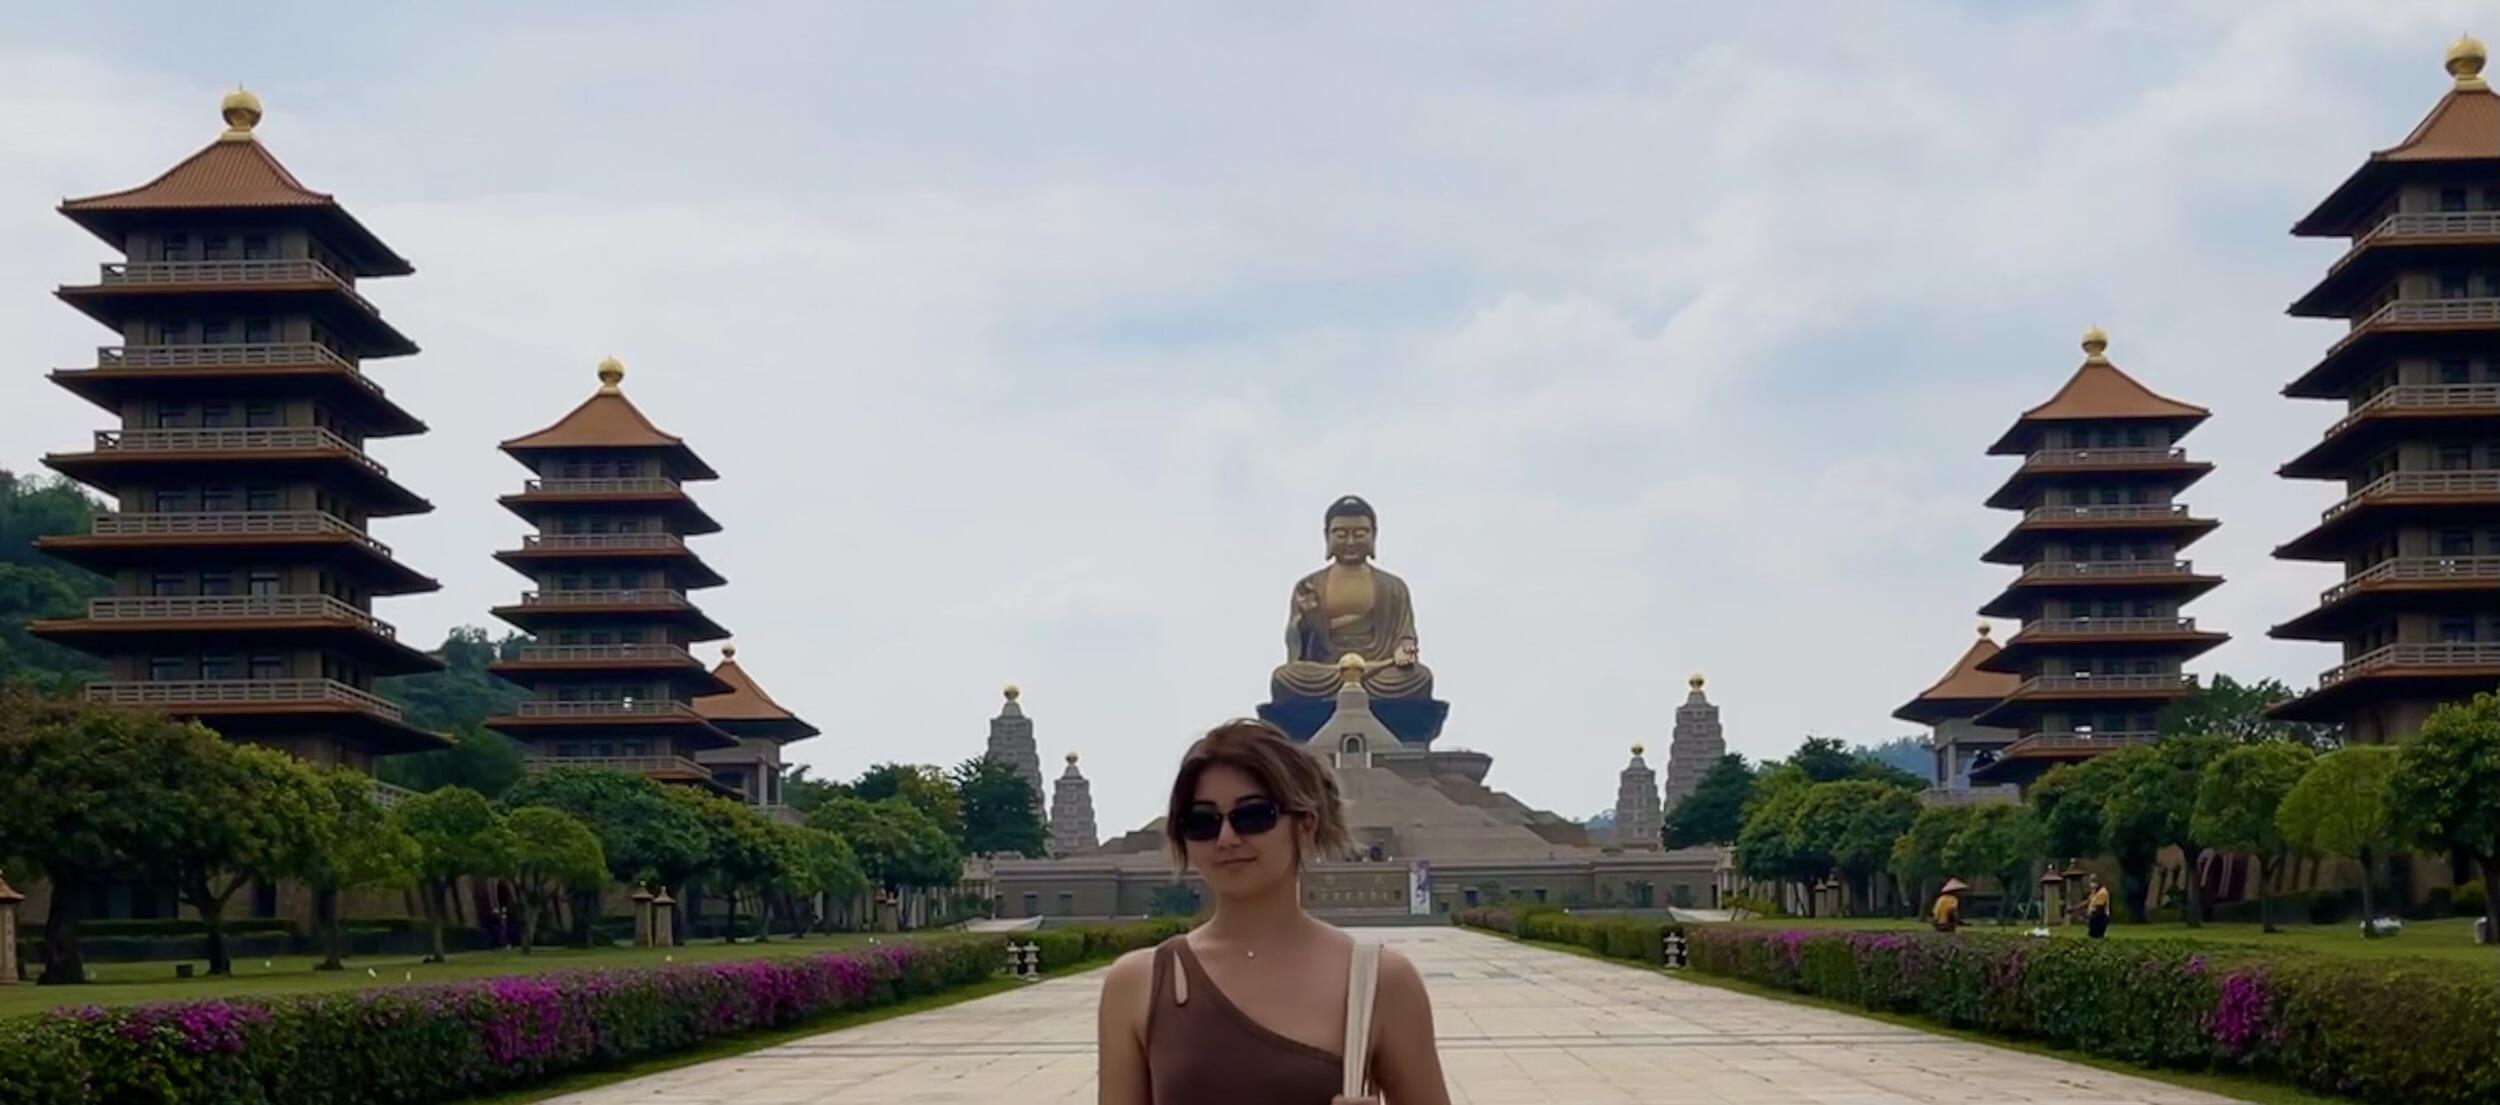 Naomi Ghahrai standing in the foreground on a pathway that leads to a large Buddhist monastery.